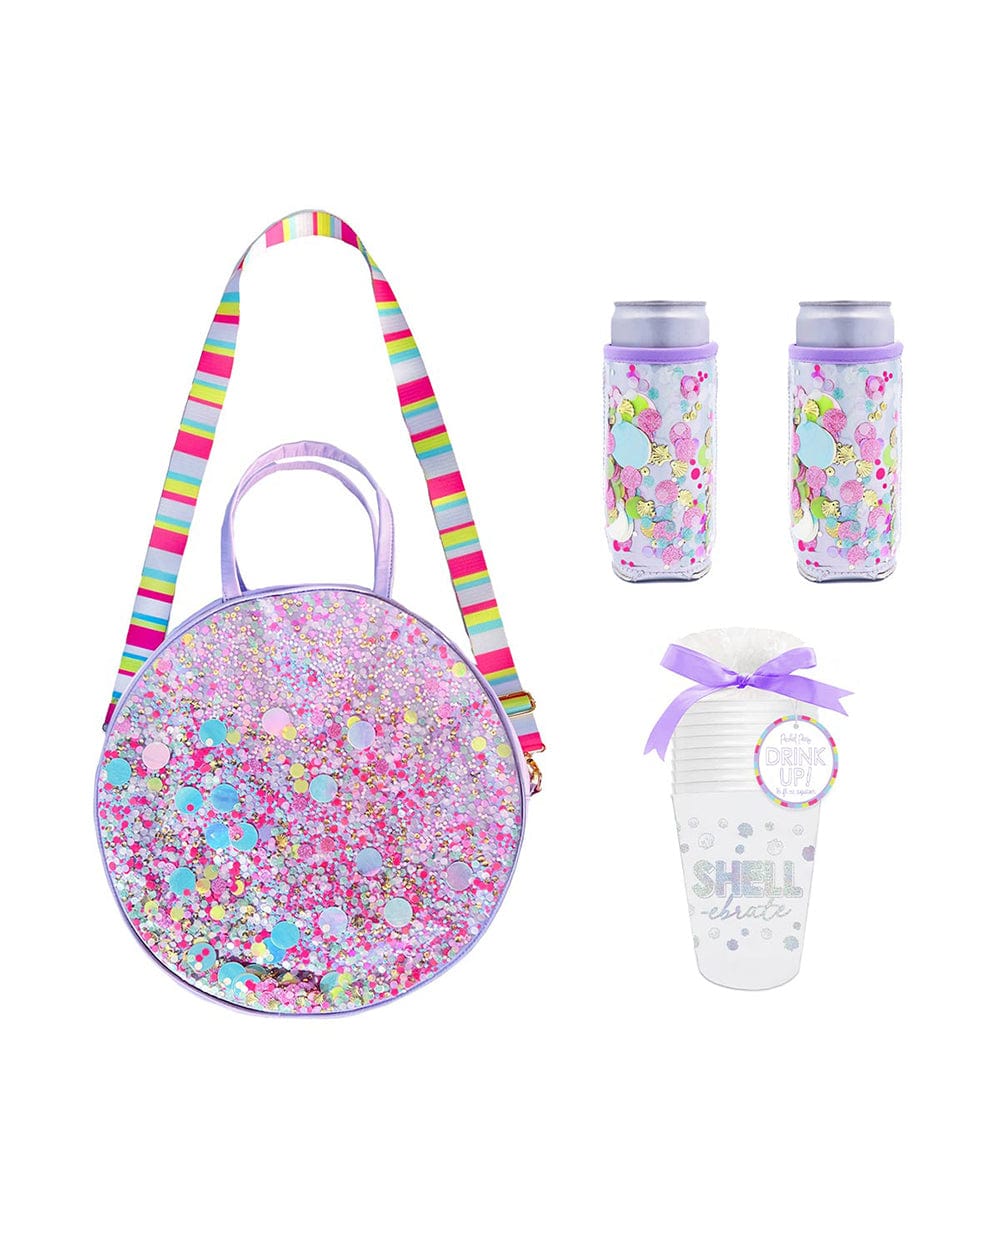 Party Popper Bottle / Can Cooler > Coolers > Beach Accessories